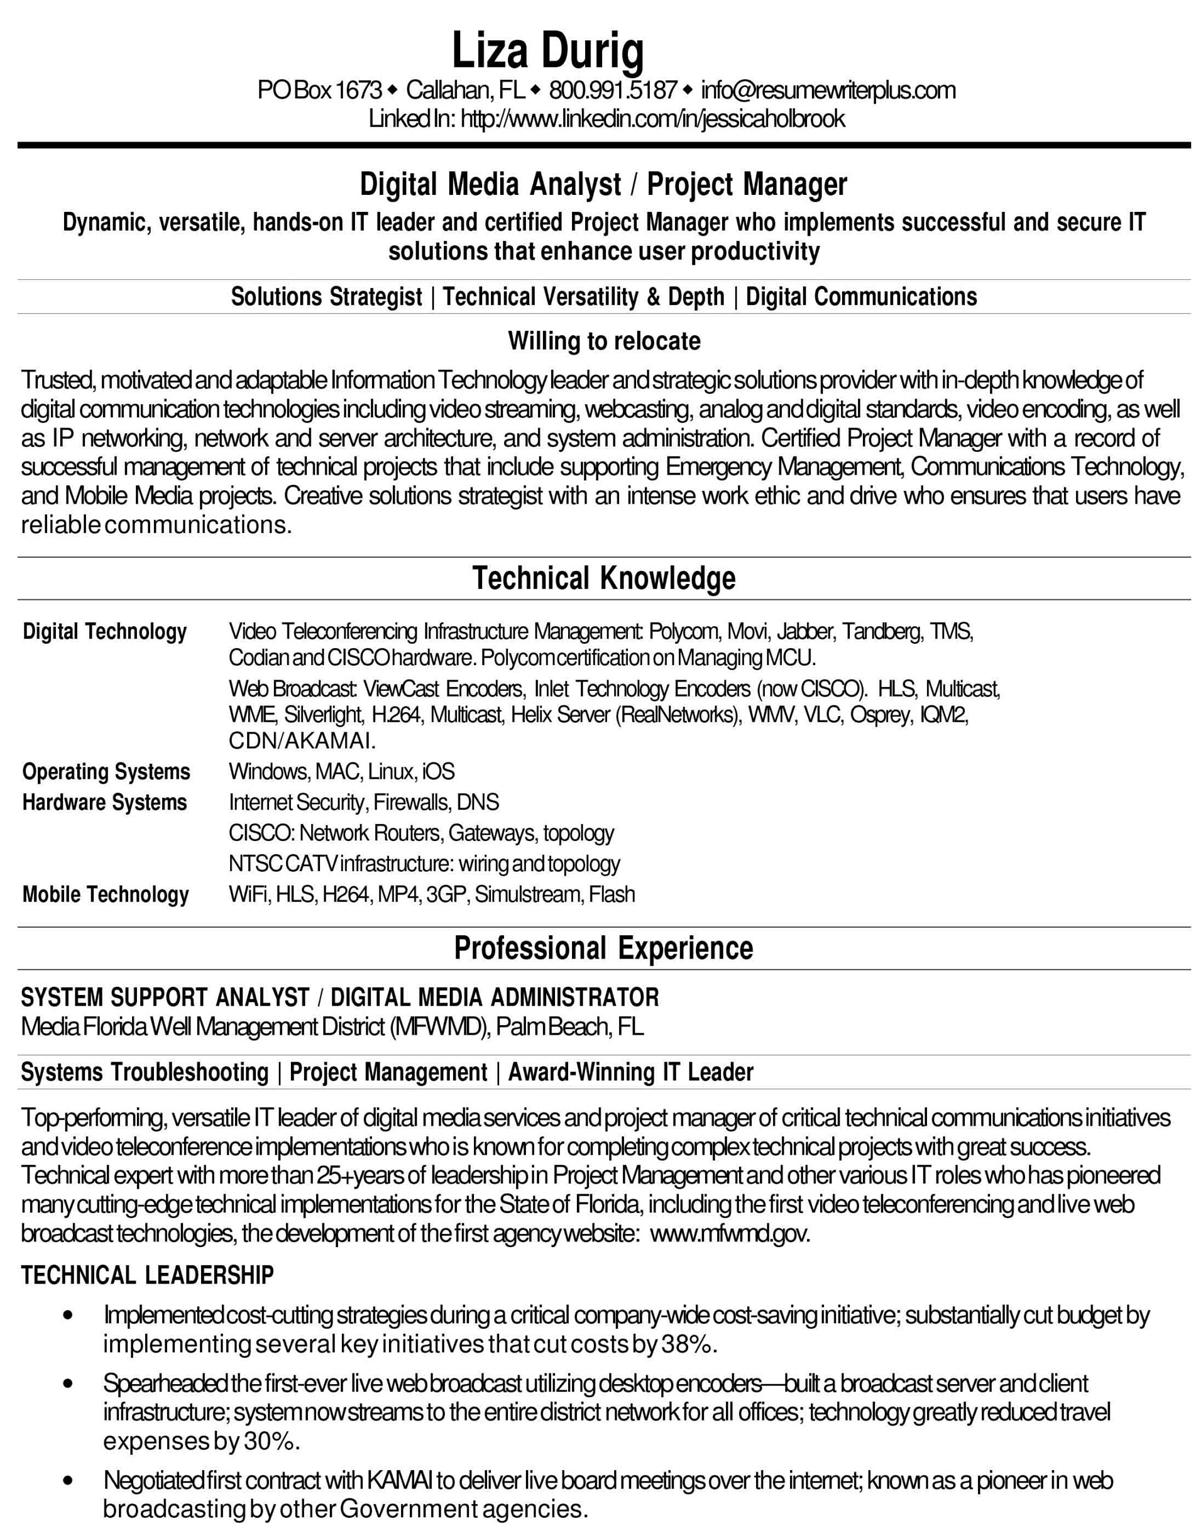 Digital-Media-Analyst-Project-Manager-Resume-1